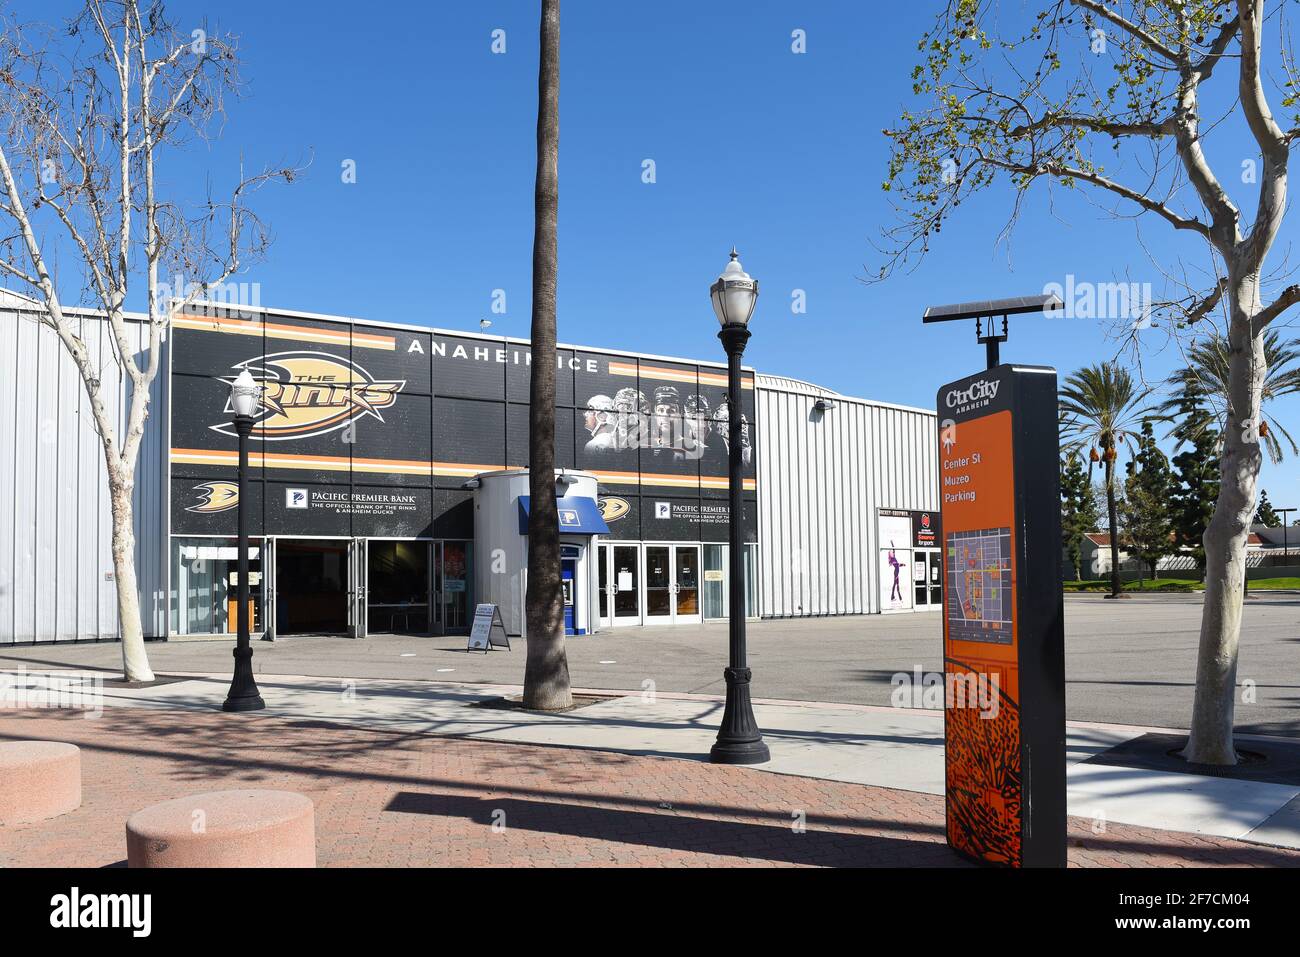 ANAHEIM, CALIFORNIA - 31 MAR 2021: Anaheim Ice is a world class  Ice Hockey and Skating facility and one of the major works of architect Frank Gehry. Stock Photo